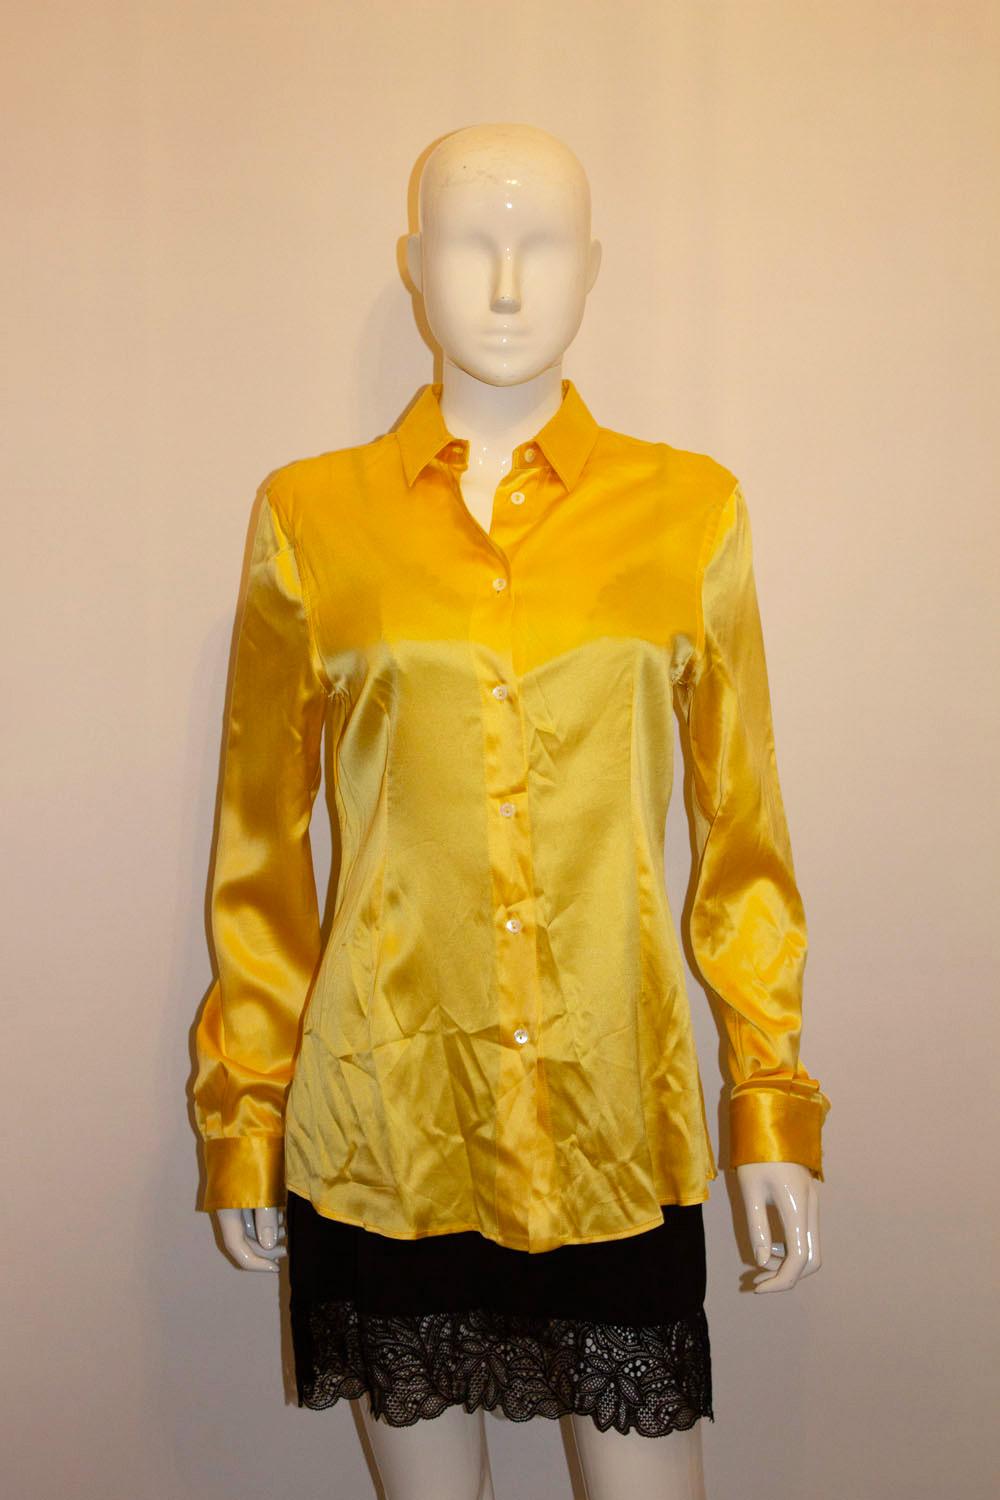  A chic silk blouse by Dolce and Gabbana in a  stunning shade of yellow. The  blouse has a button front opening, pleat at the back and single button cuffs. 96% silk, 4% spandex. Made in Italy 
Size 44 . Measurements: Bust 36'', length 28''